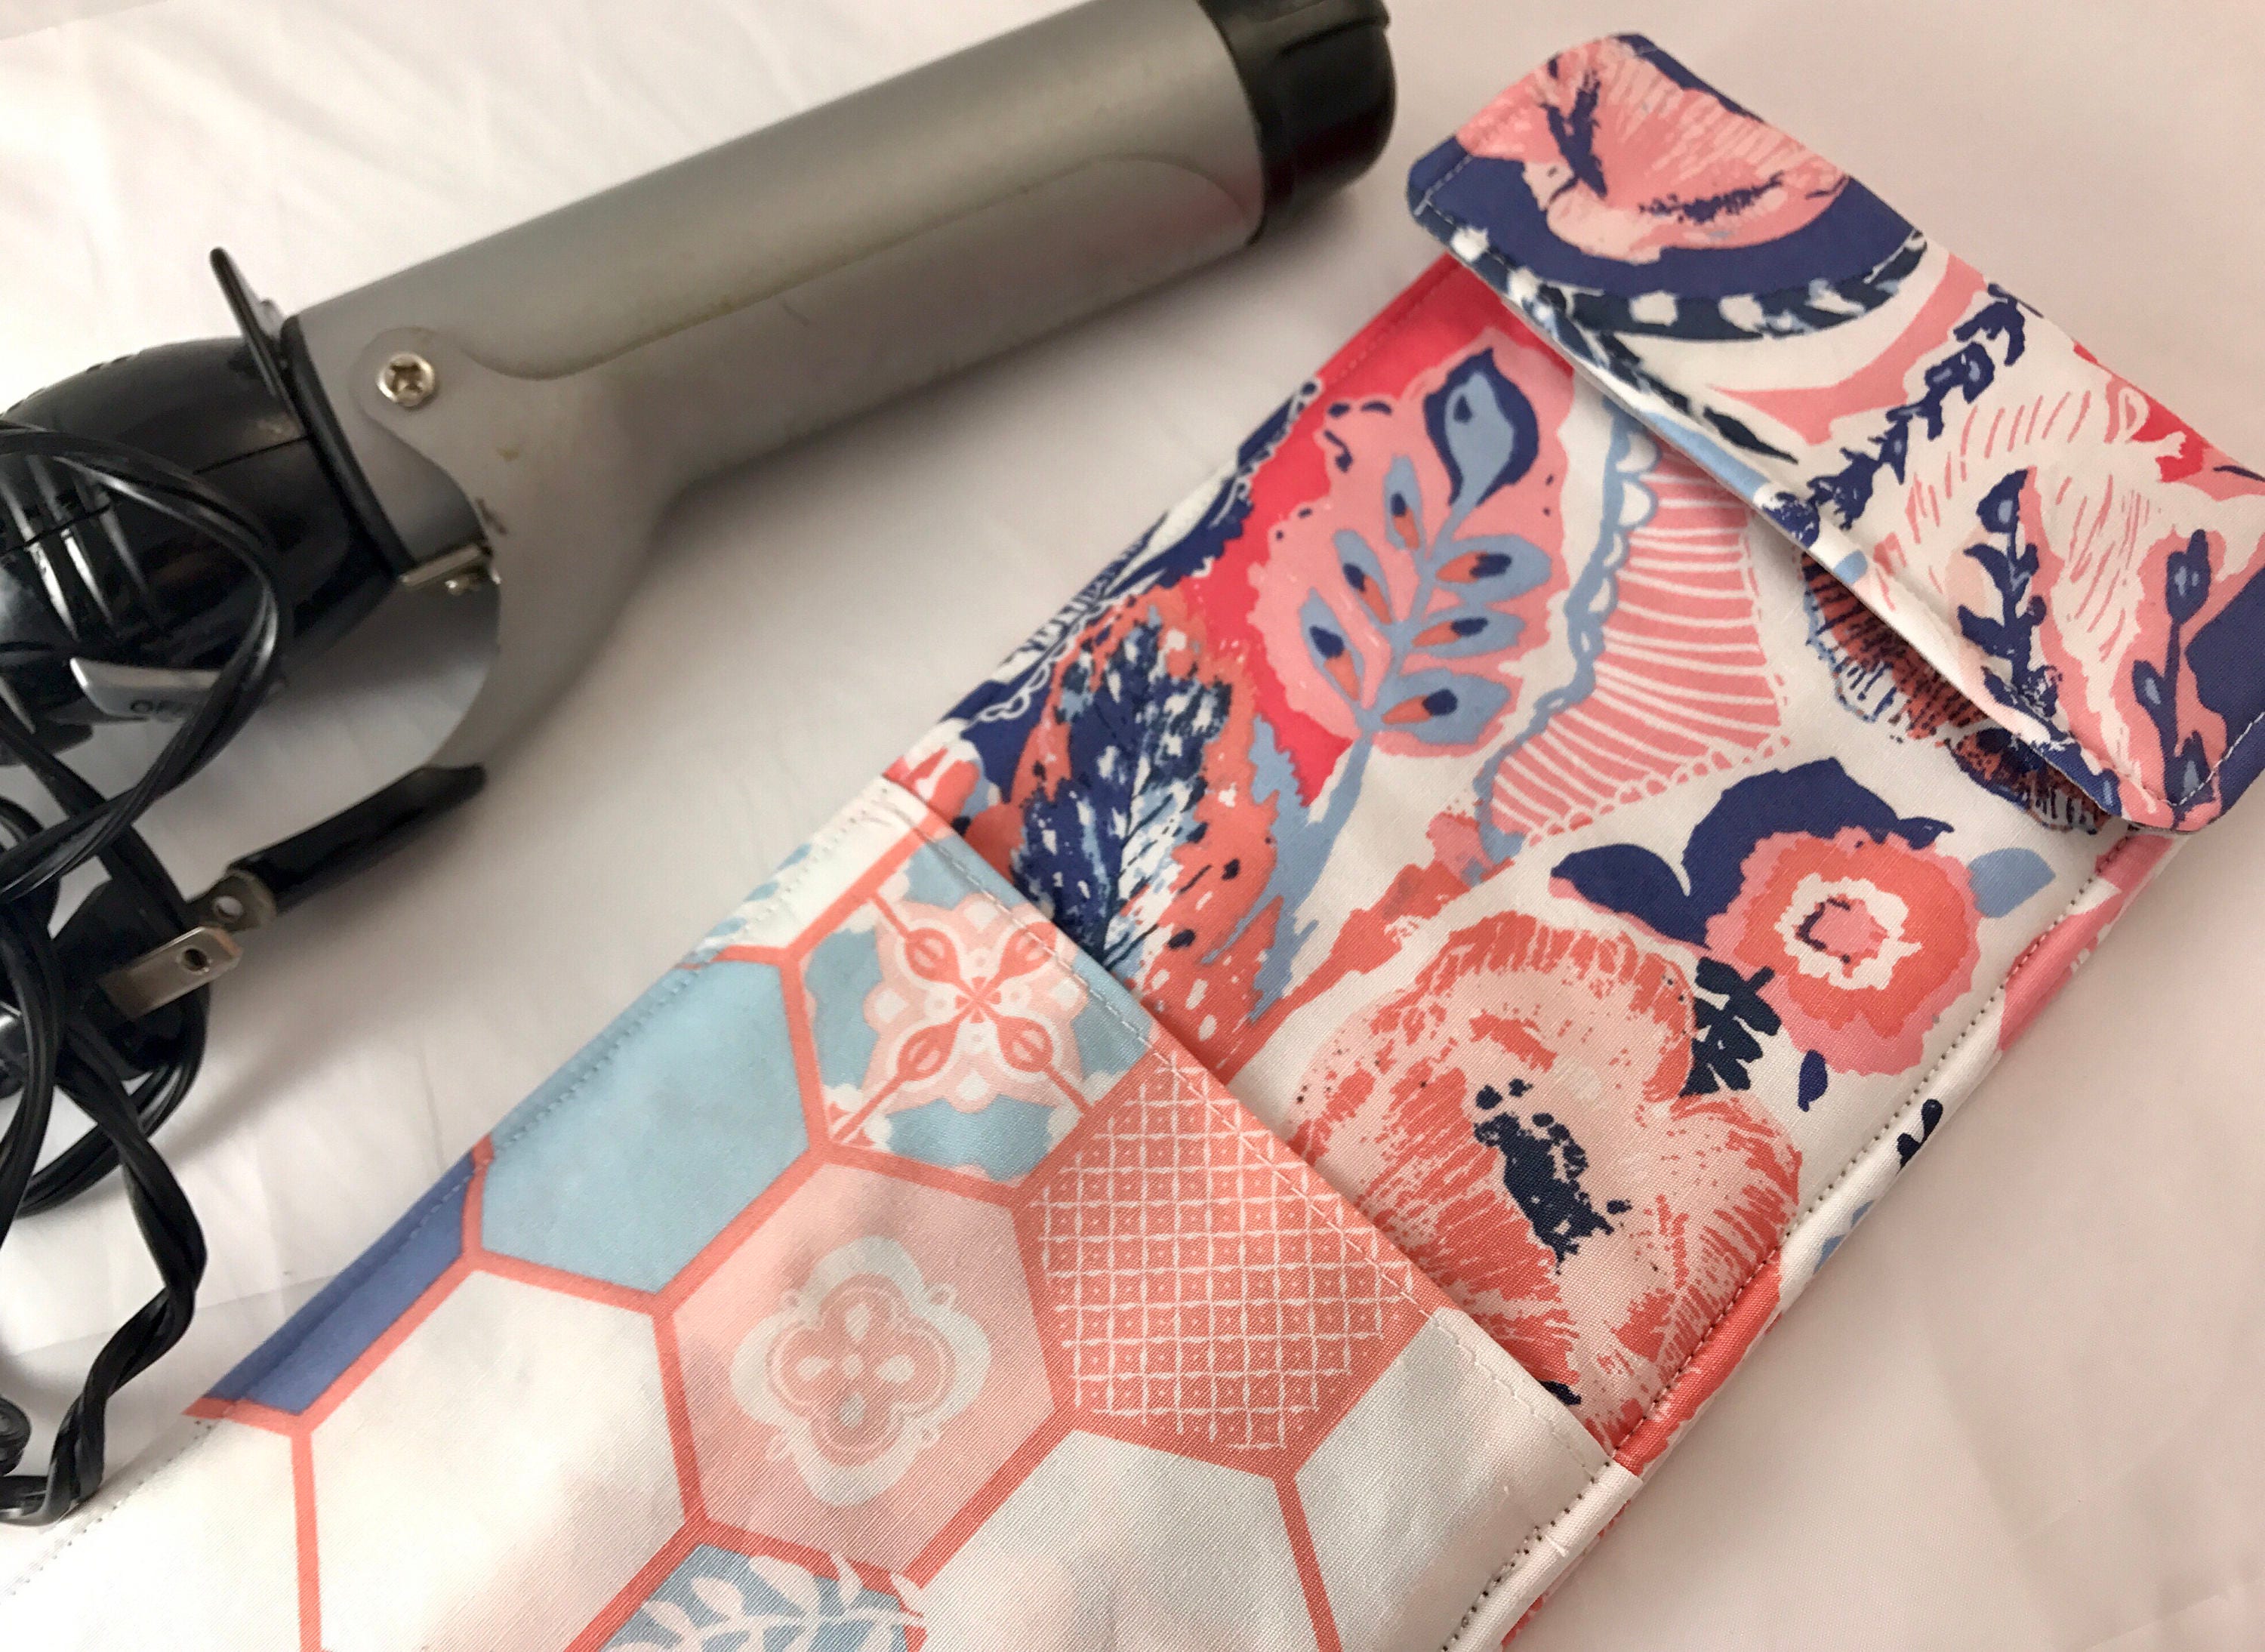 Hot Tool Holster, Flat Iron Case, Curling Iron Case, Curling Wand Case,  Travel Tool Case, Flat Iron Sleeve, Rifle Paper Fabric Travel Case 